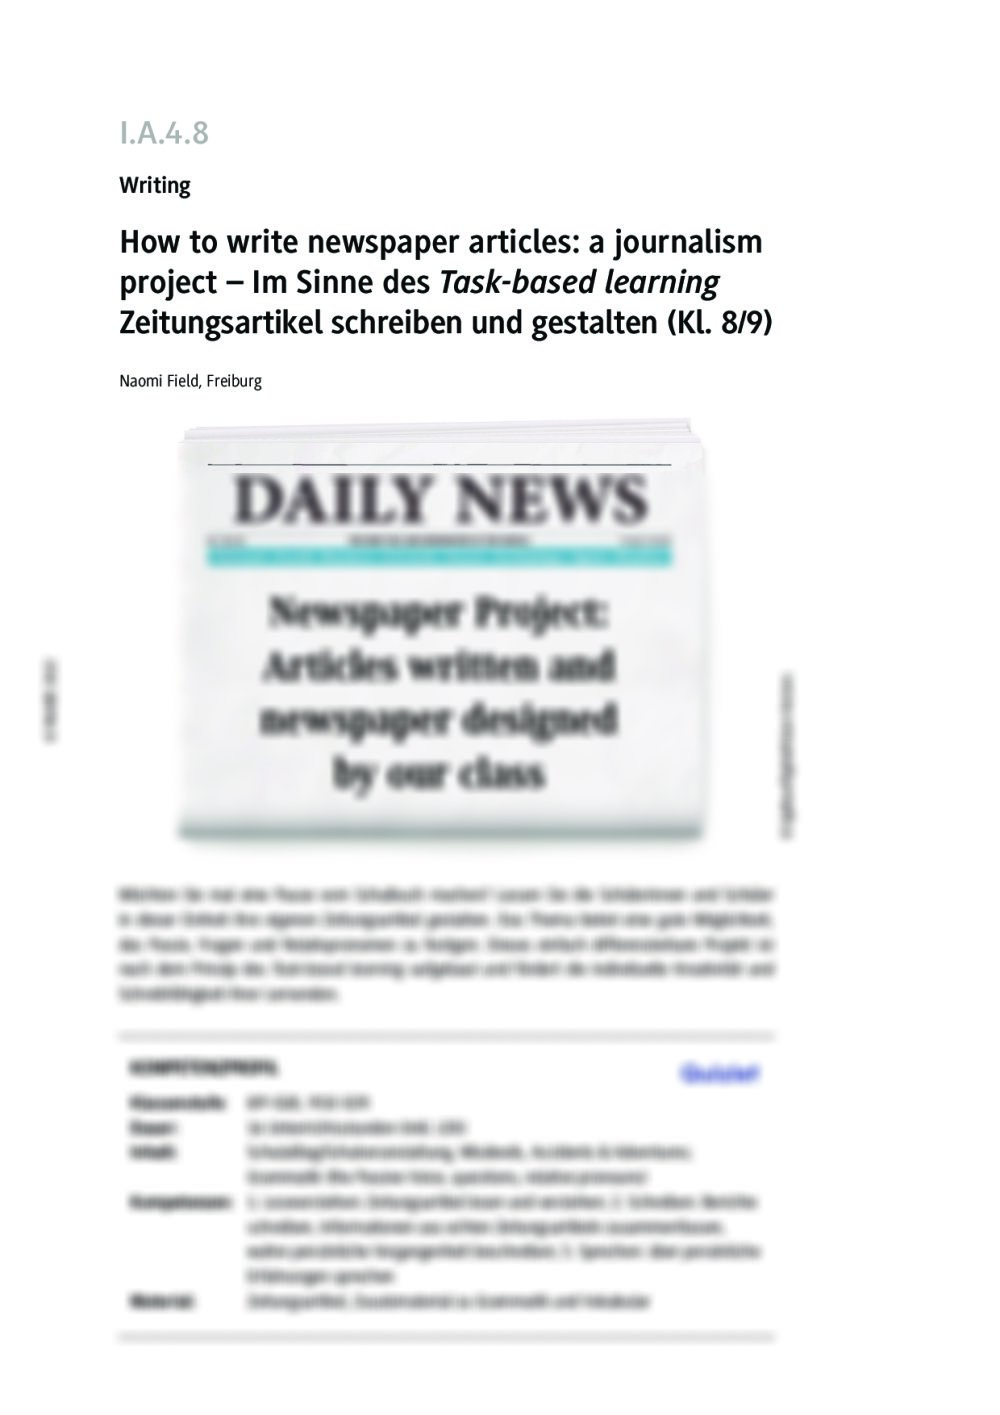 How to write newspaper articles: a journalism project - Seite 1